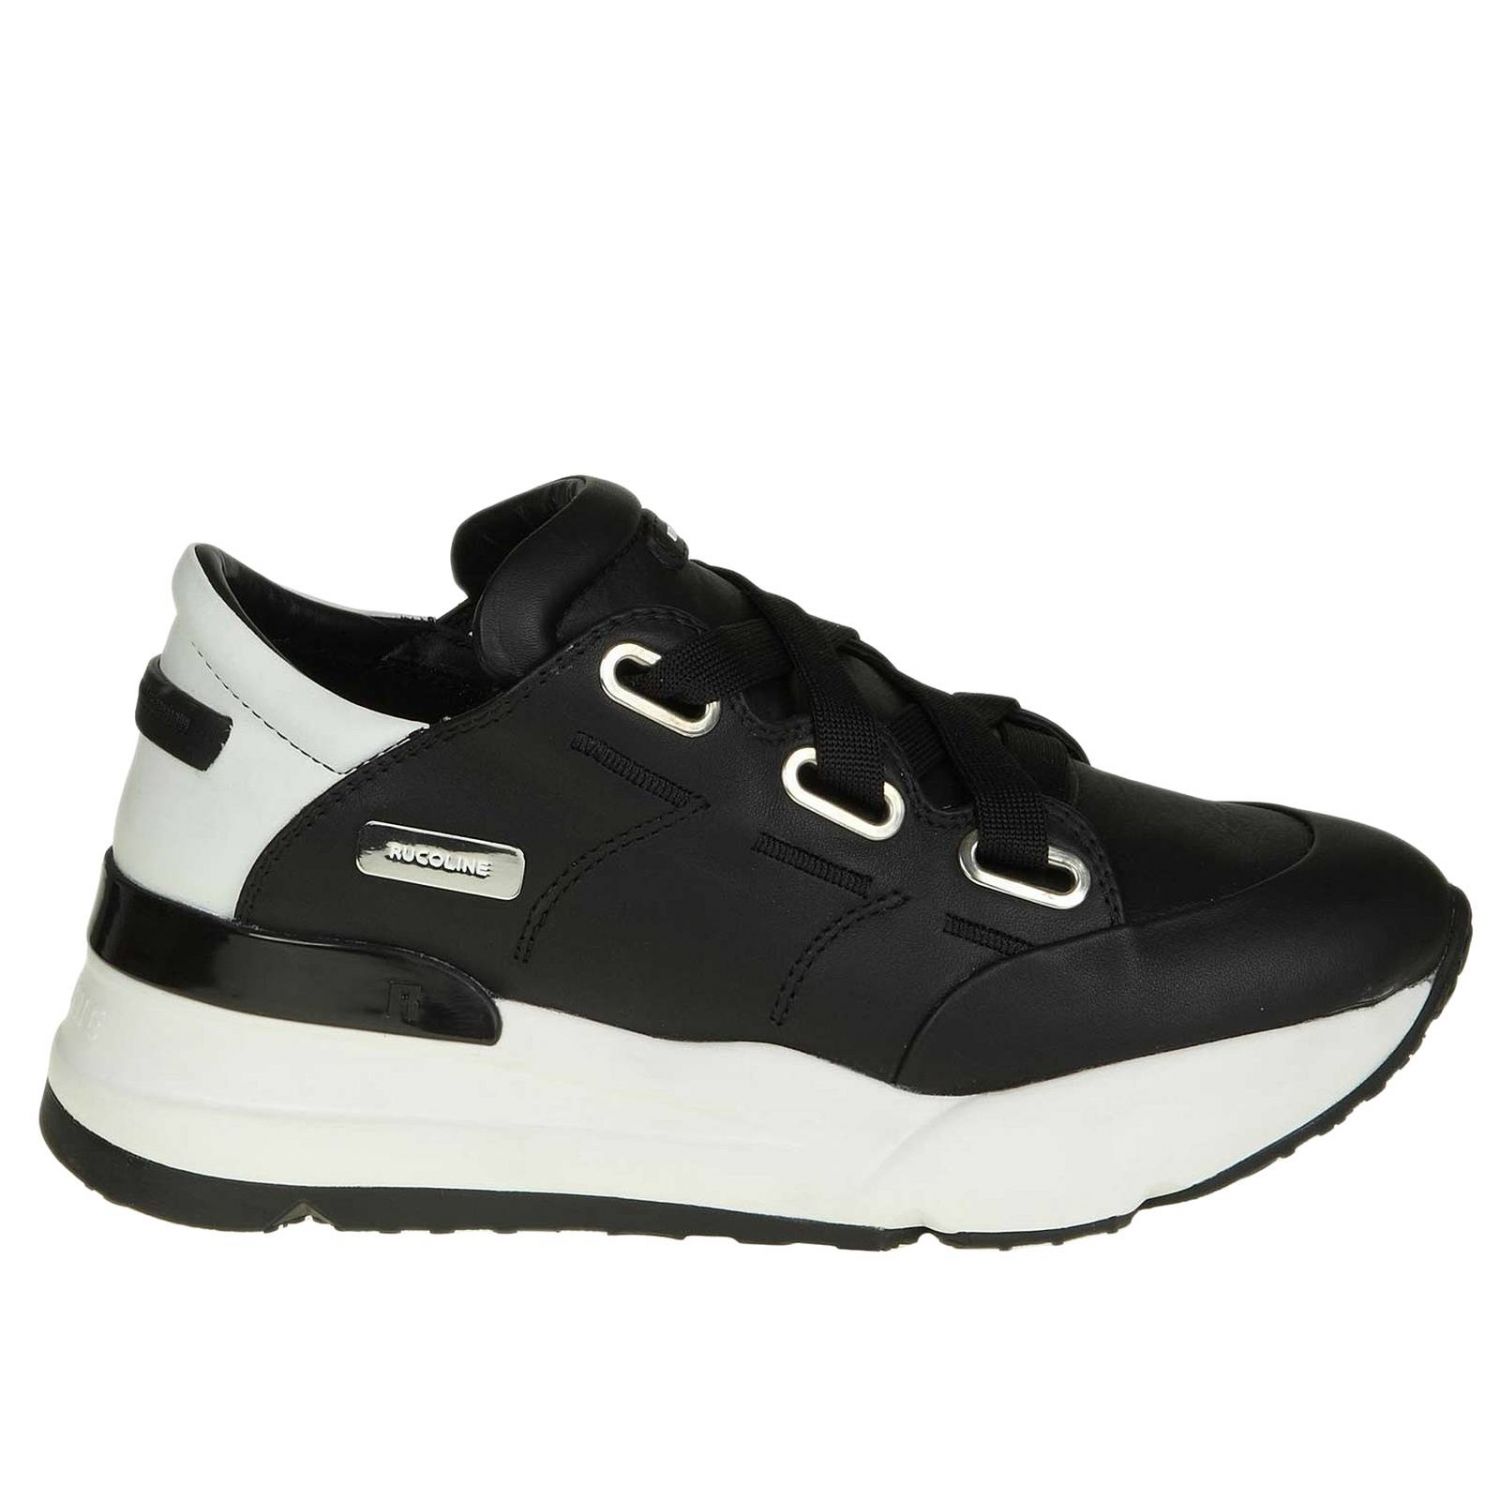 Rucoline Outlet: sneakers for women - Black | Rucoline sneakers 4038 ...